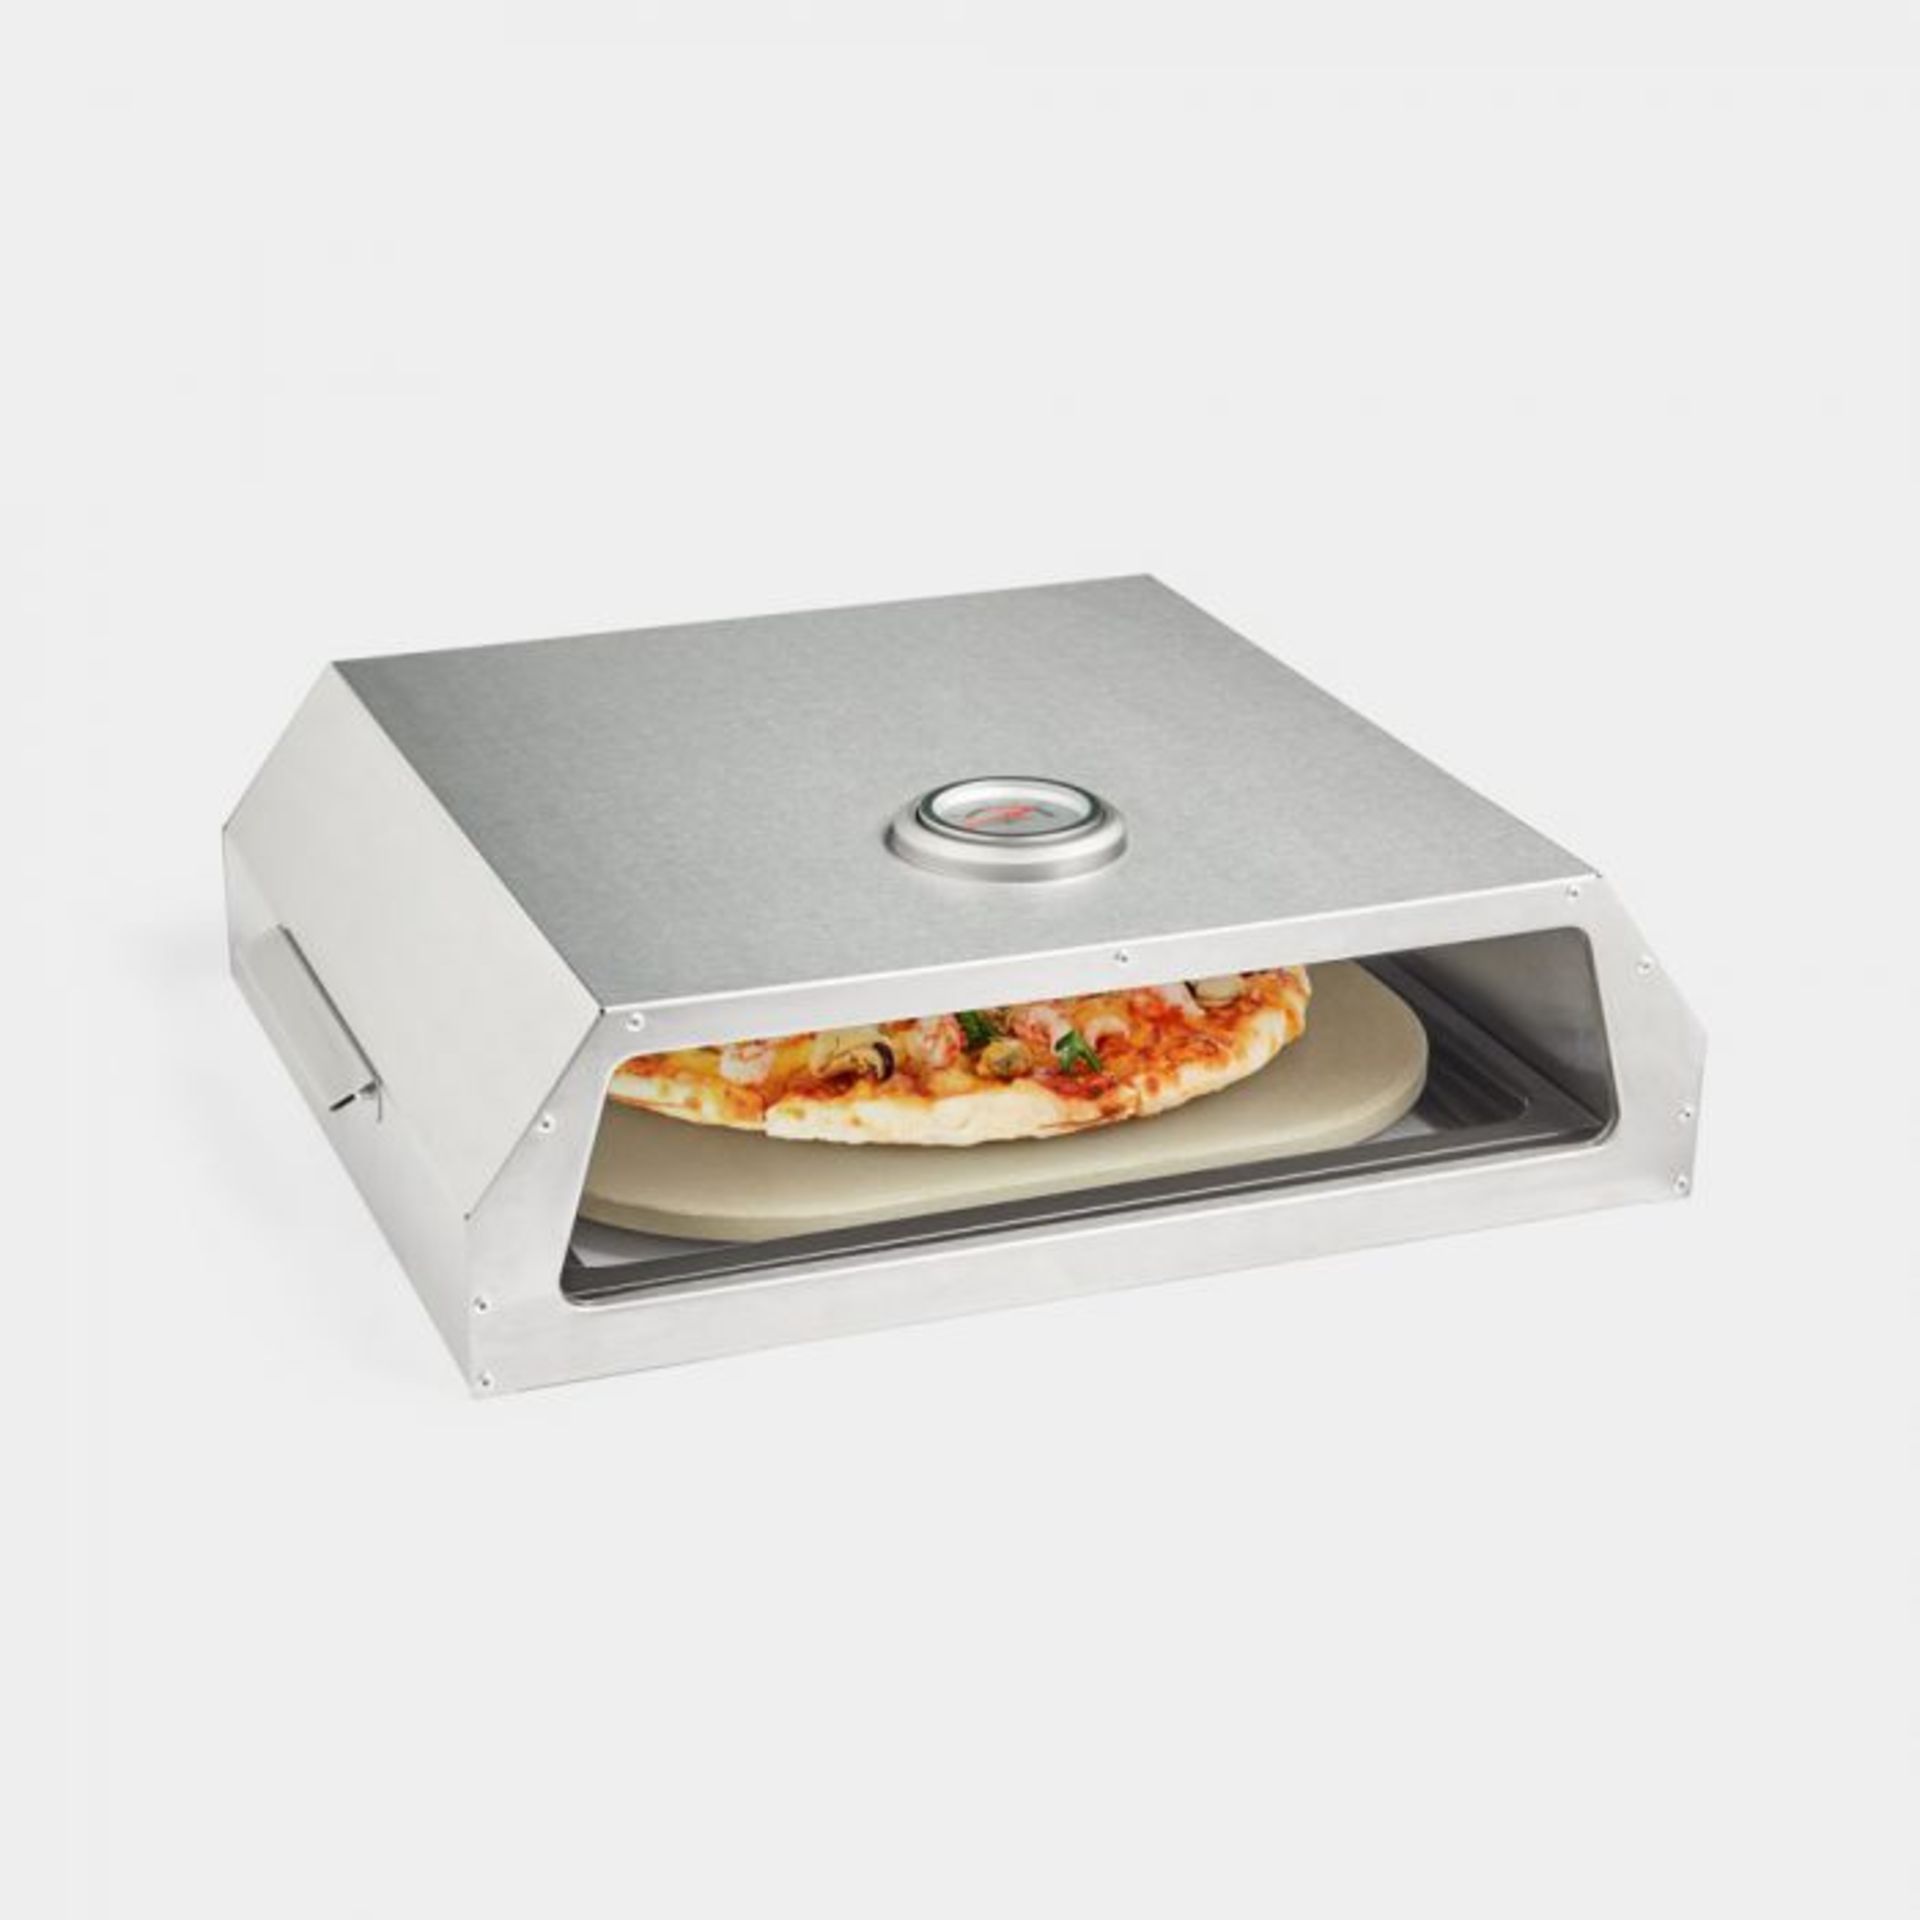 BBQ Grill Top Pizza Oven. Your al fresco experience doesn’t have to be limited to just burgers or